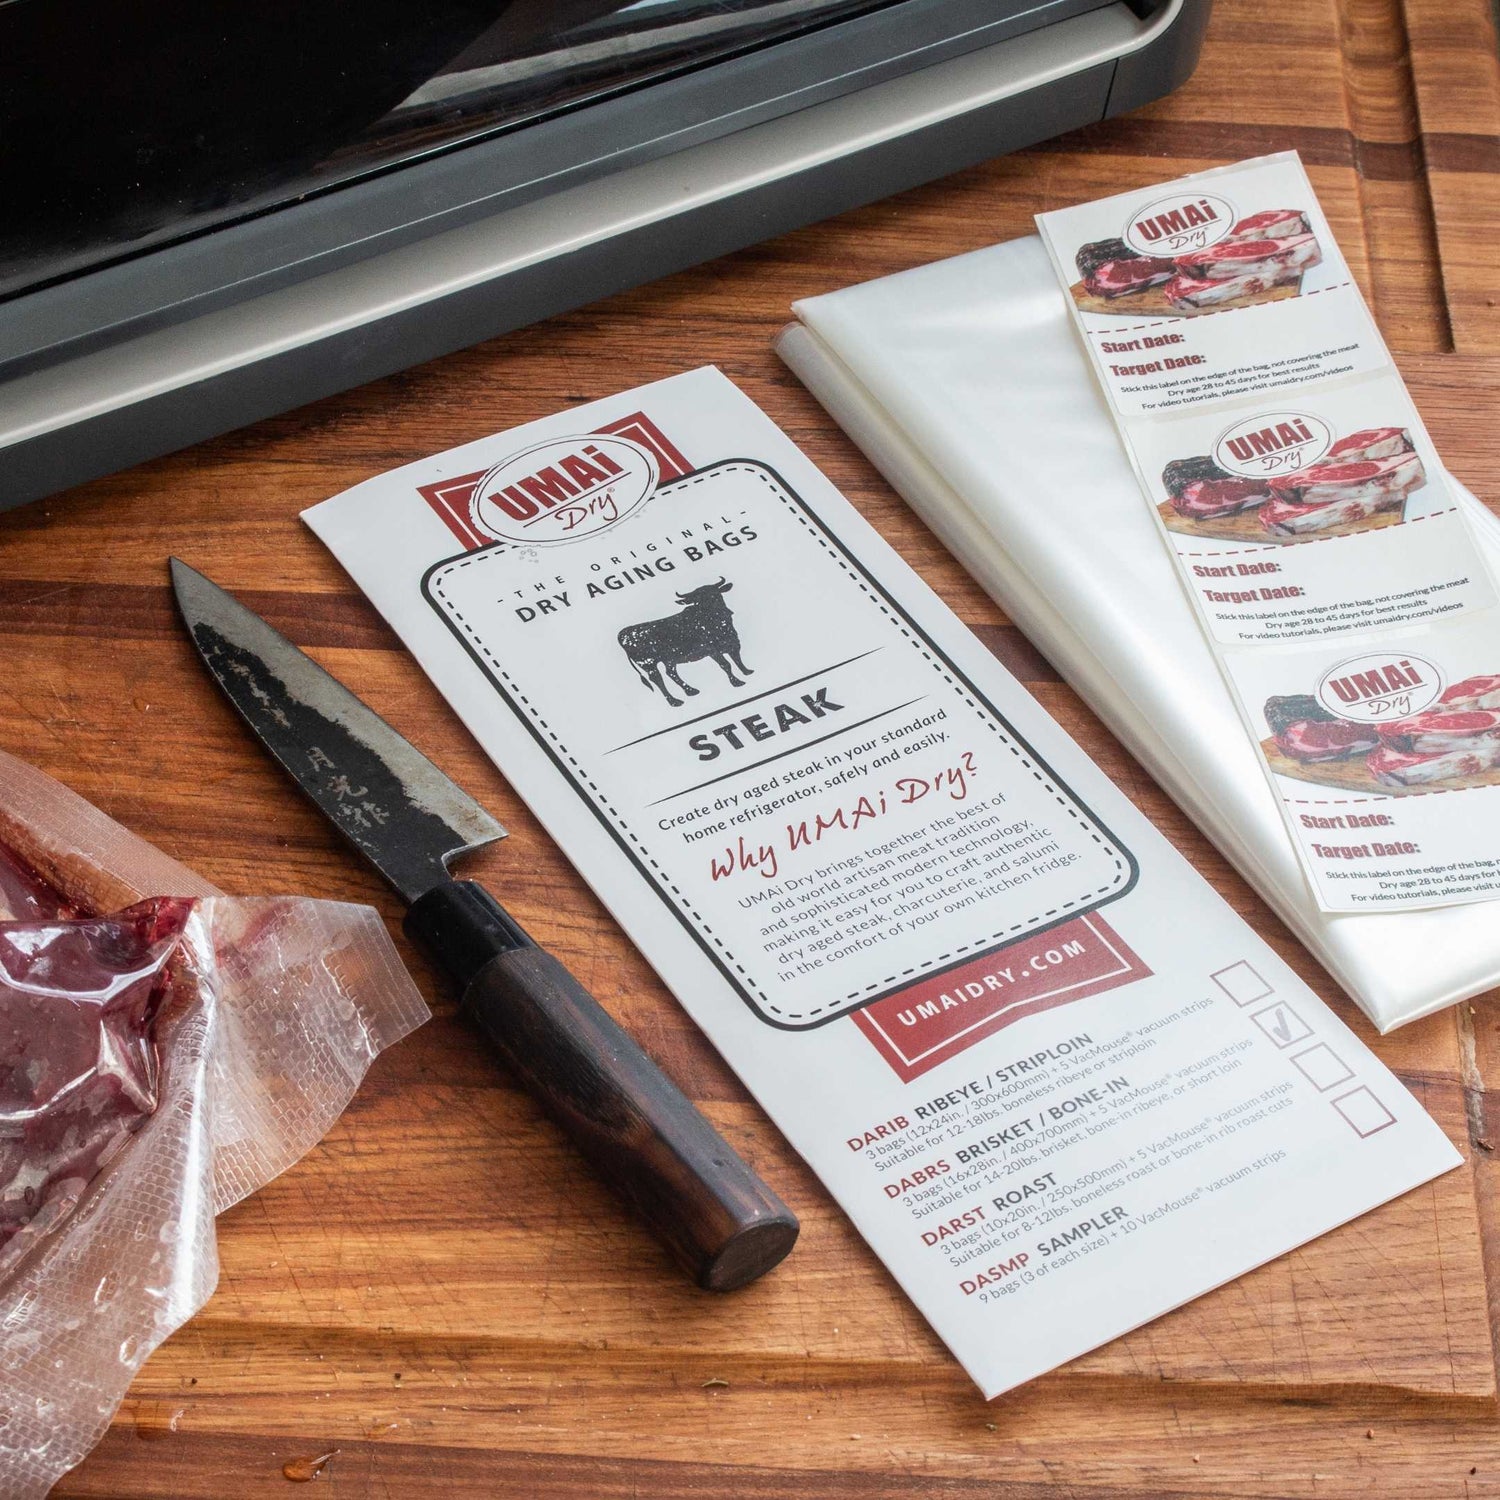 You Can Dry-Age Steaks in Your Fridge - It's Easier to Upgrade Your Steaks  Than You Think.